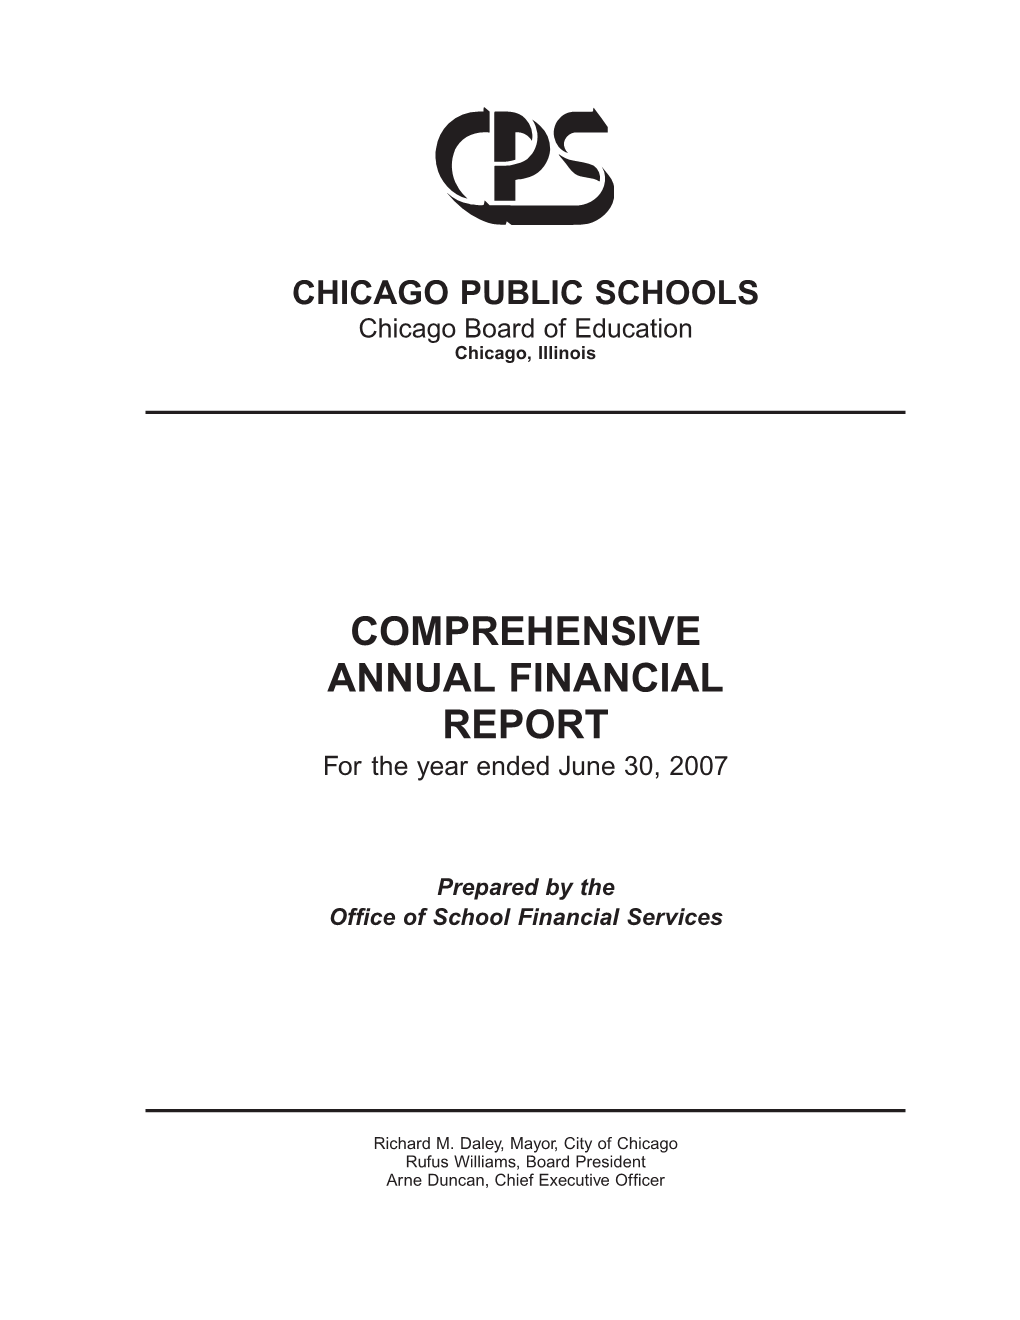 COMPREHENSIVE ANNUAL FINANCIAL REPORT for the Year Ended June 30, 2007